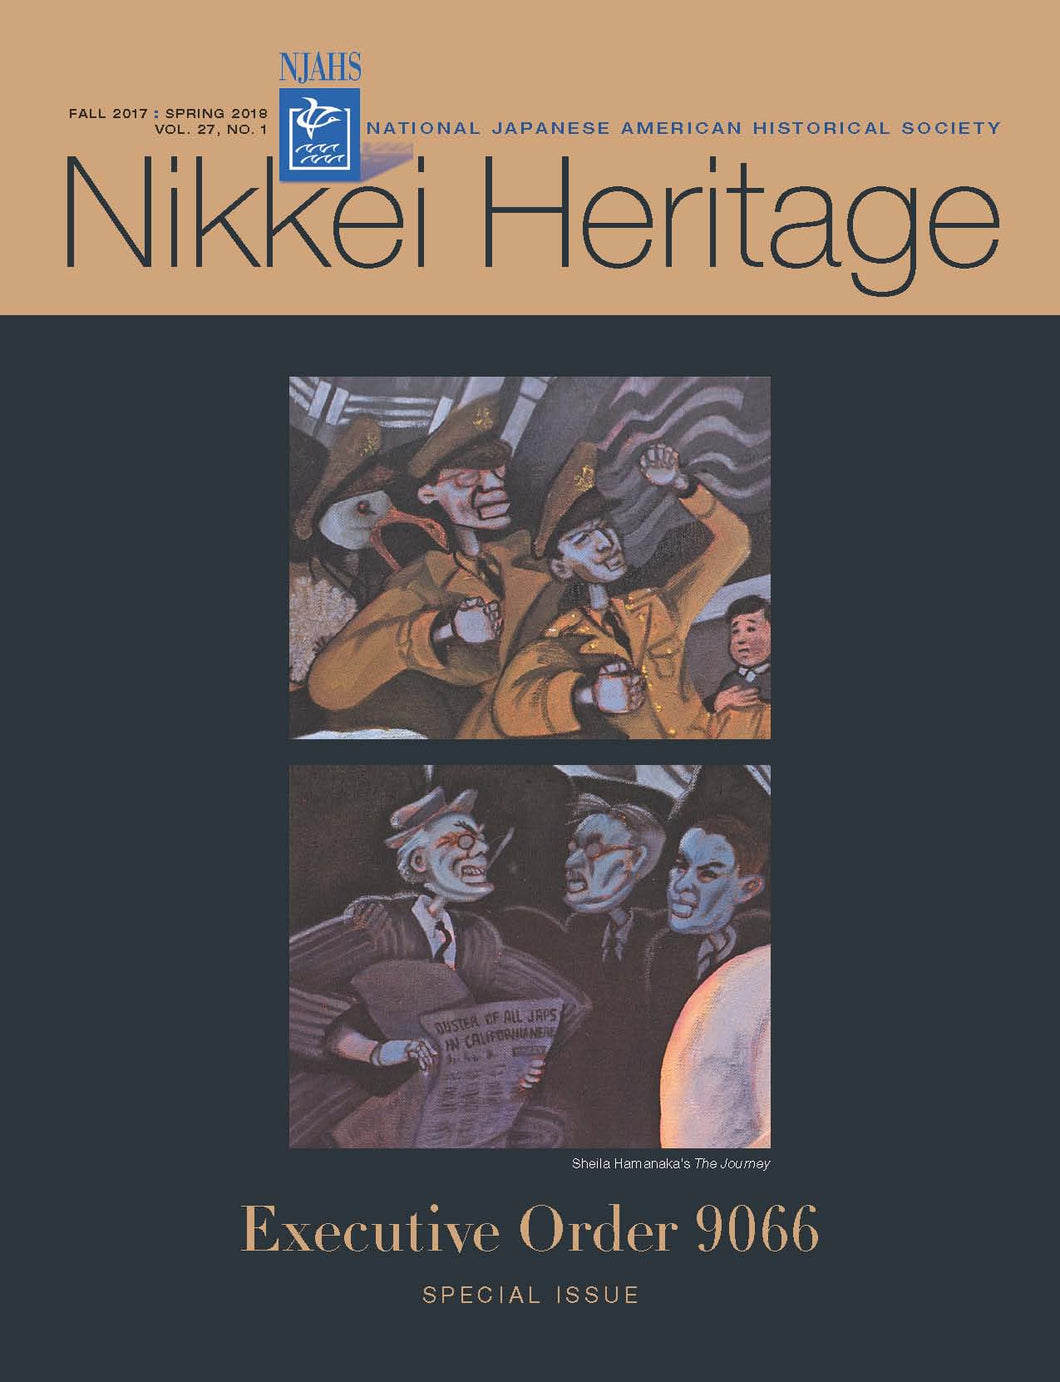 Nikkei Heritage - Executive Order 9066 Special Issue